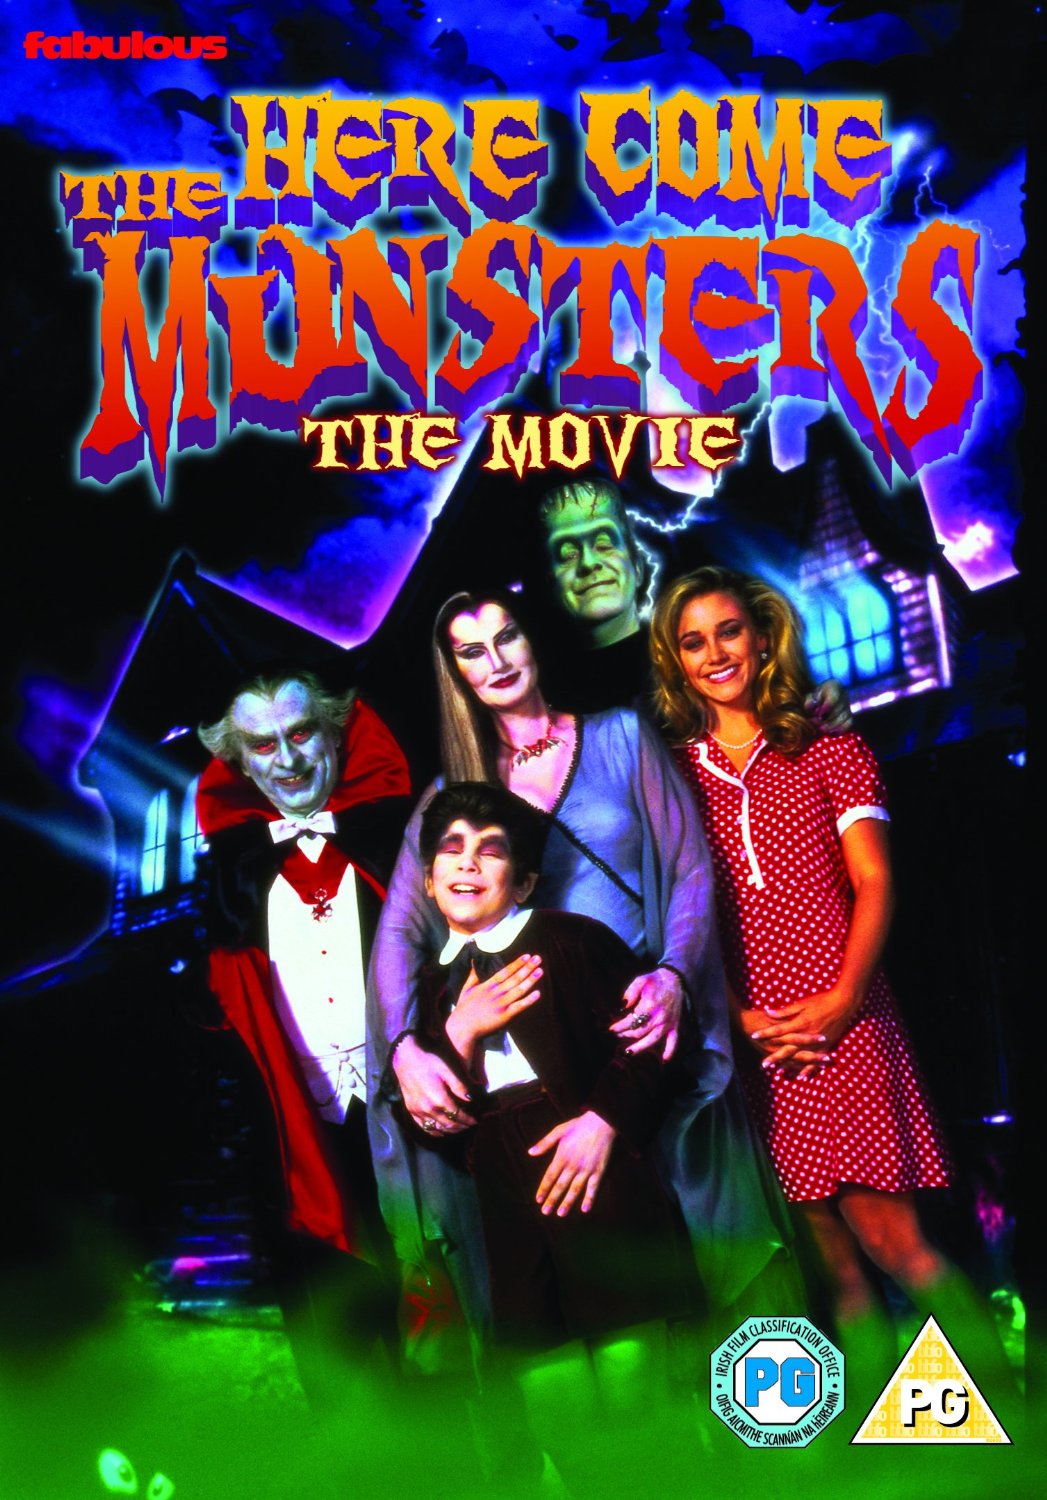 Nice wallpapers The Munsters 1047x1500px